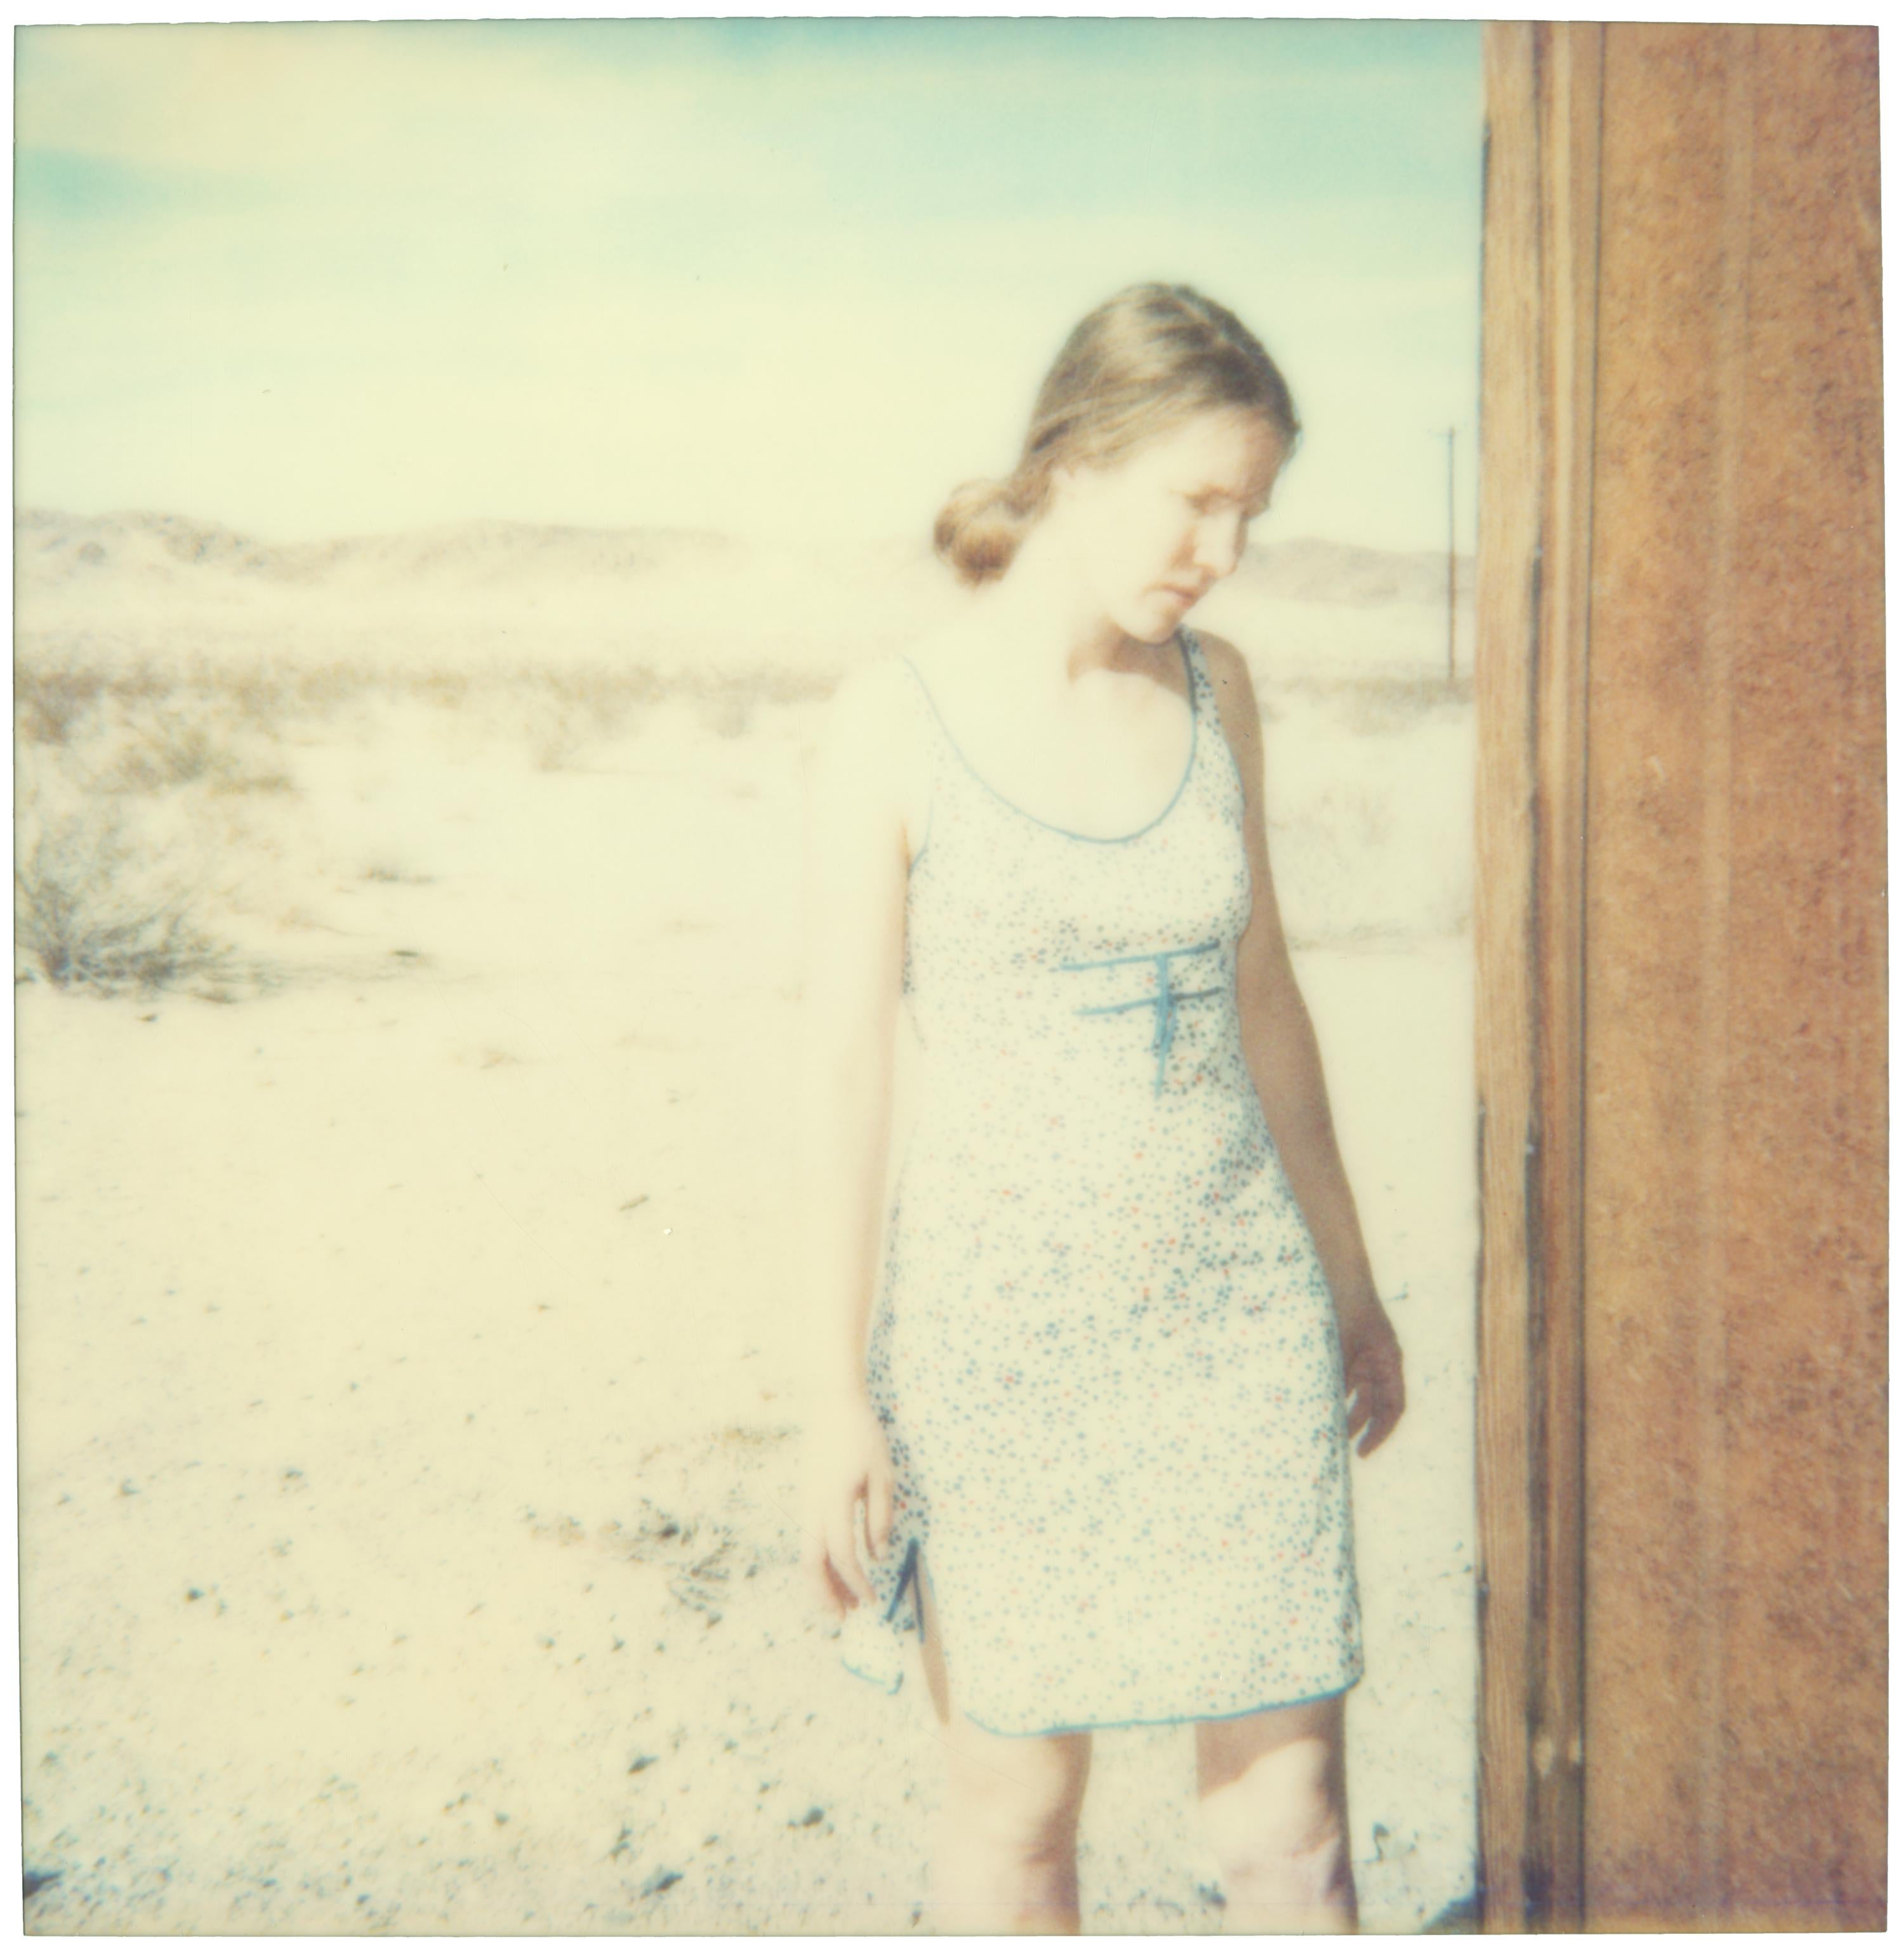 Giants (Stranger than Paradise), triptych, analog, based on 3 Polaroids - Contemporary Photograph by Stefanie Schneider